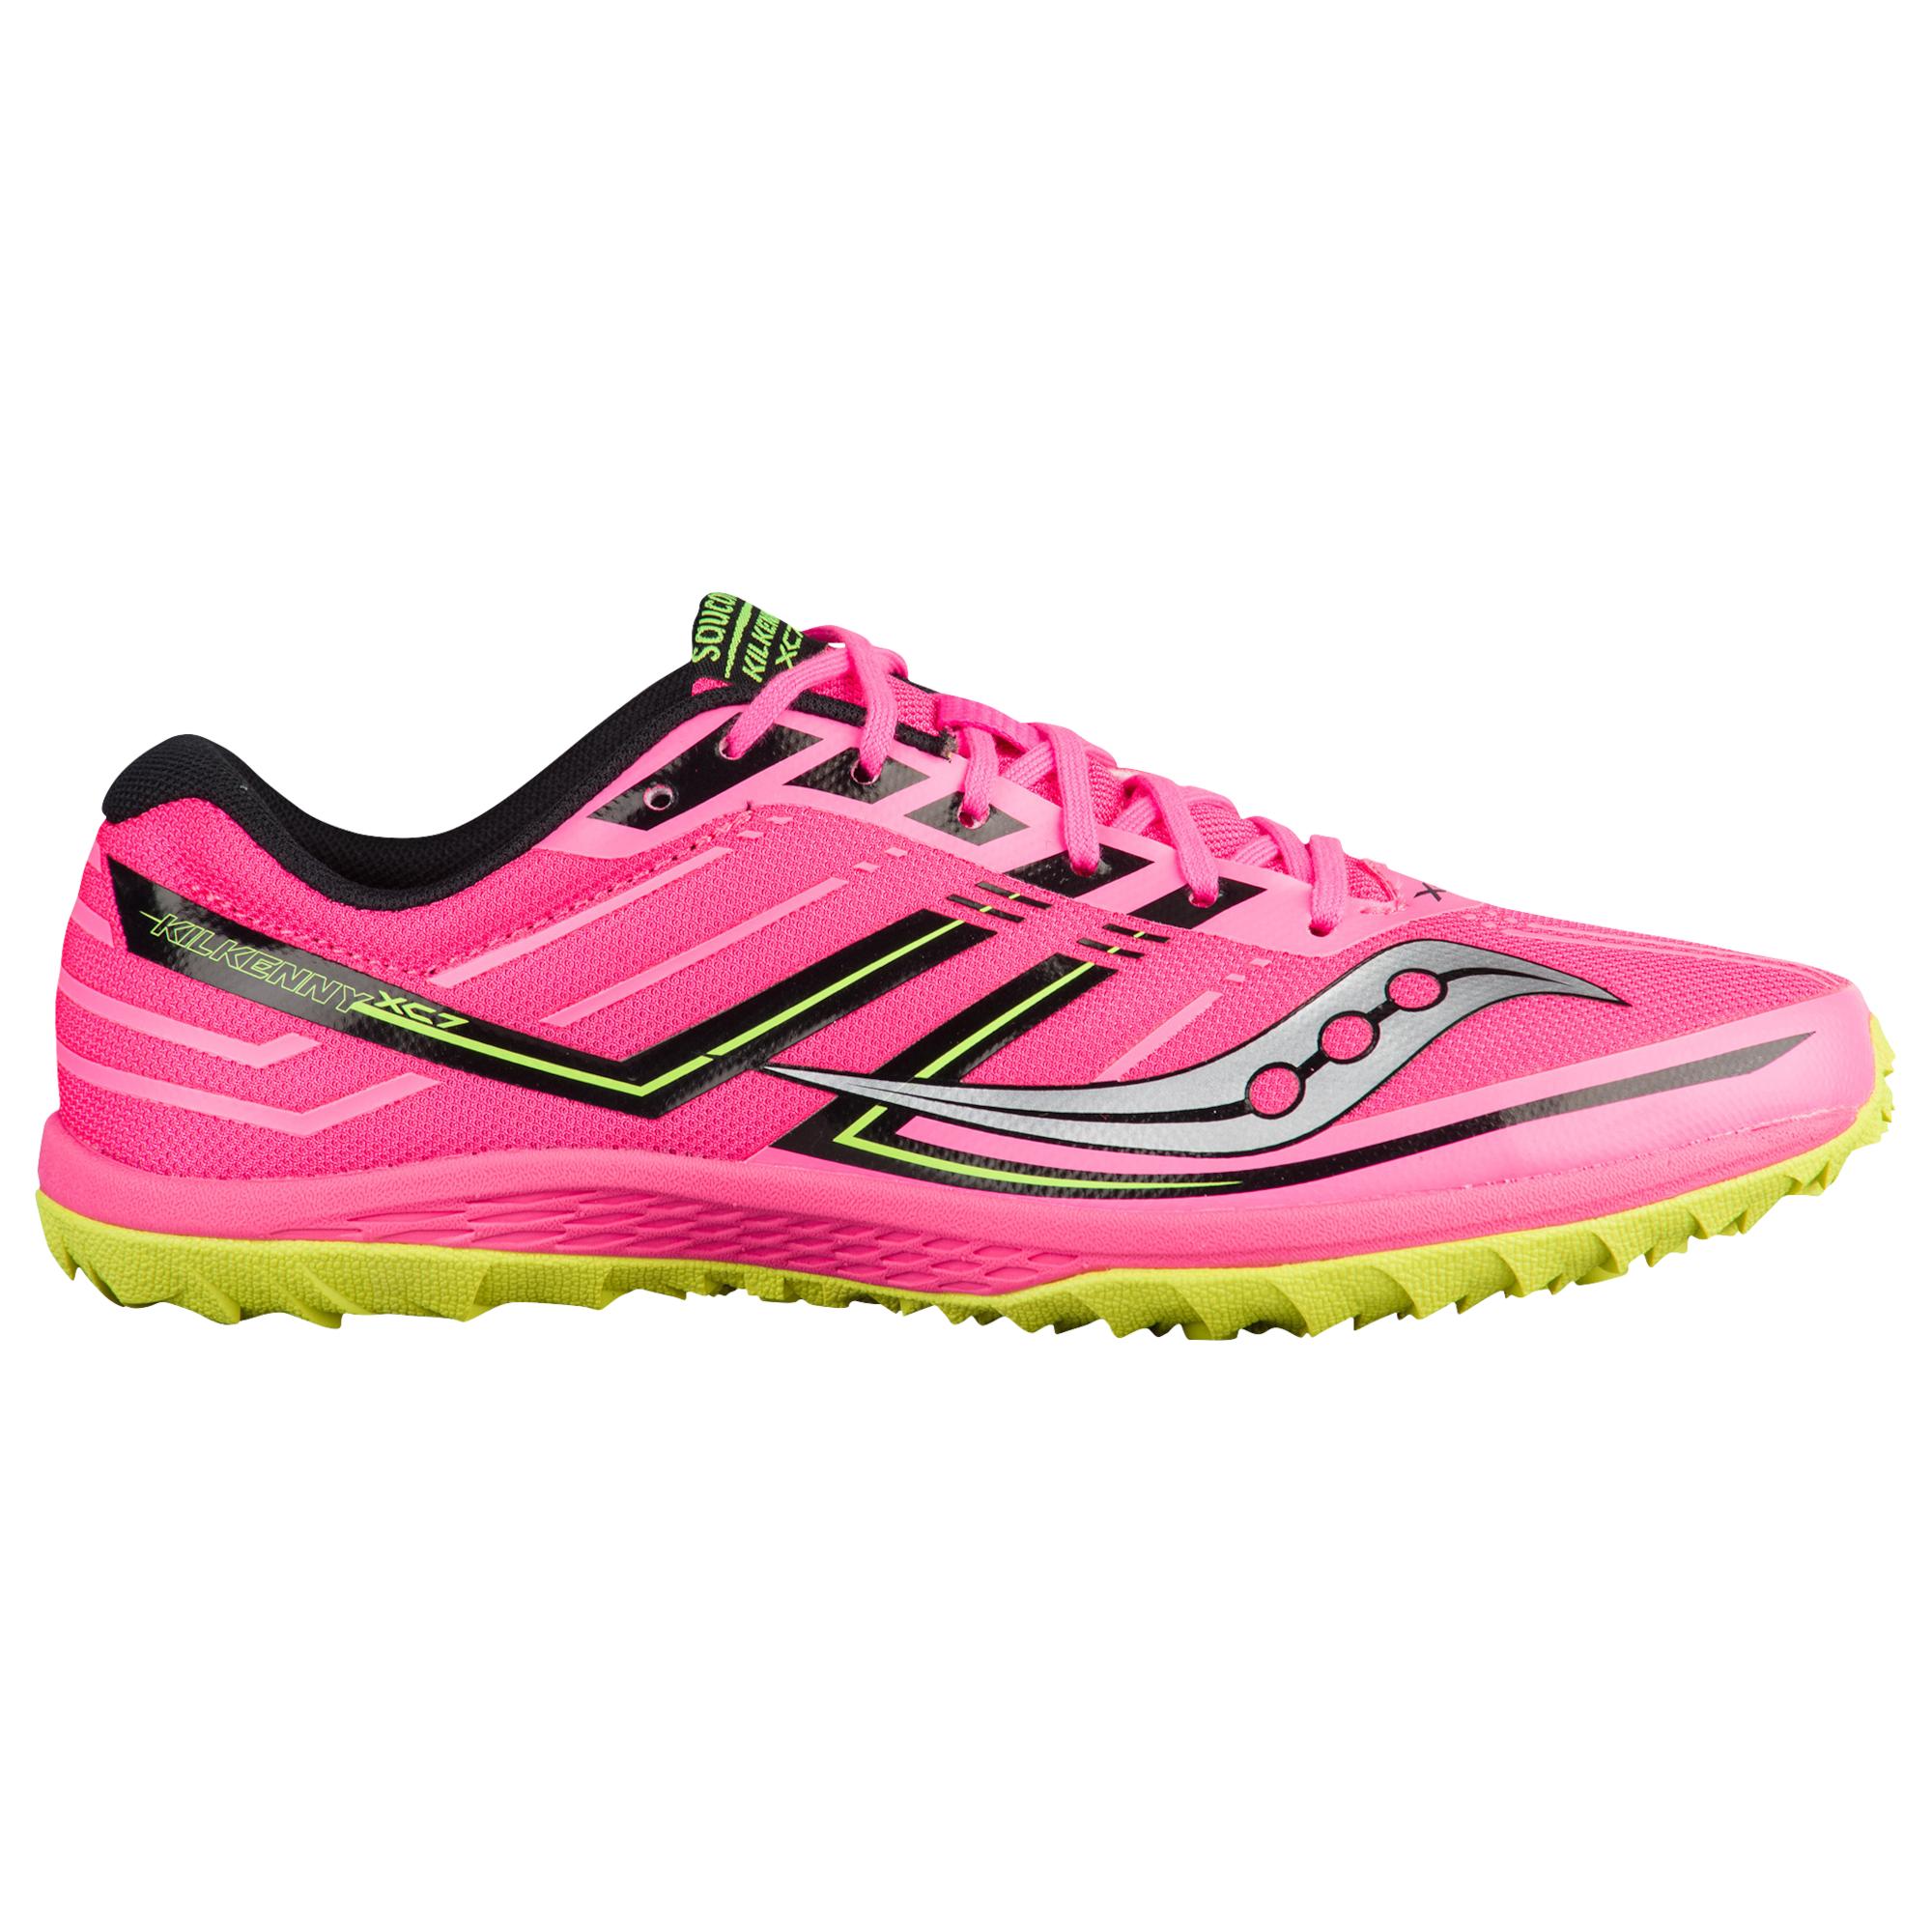 Saucony Rubber Kilkenny Xc 7 Flat Cross Country Running Shoe in Pink - Lyst